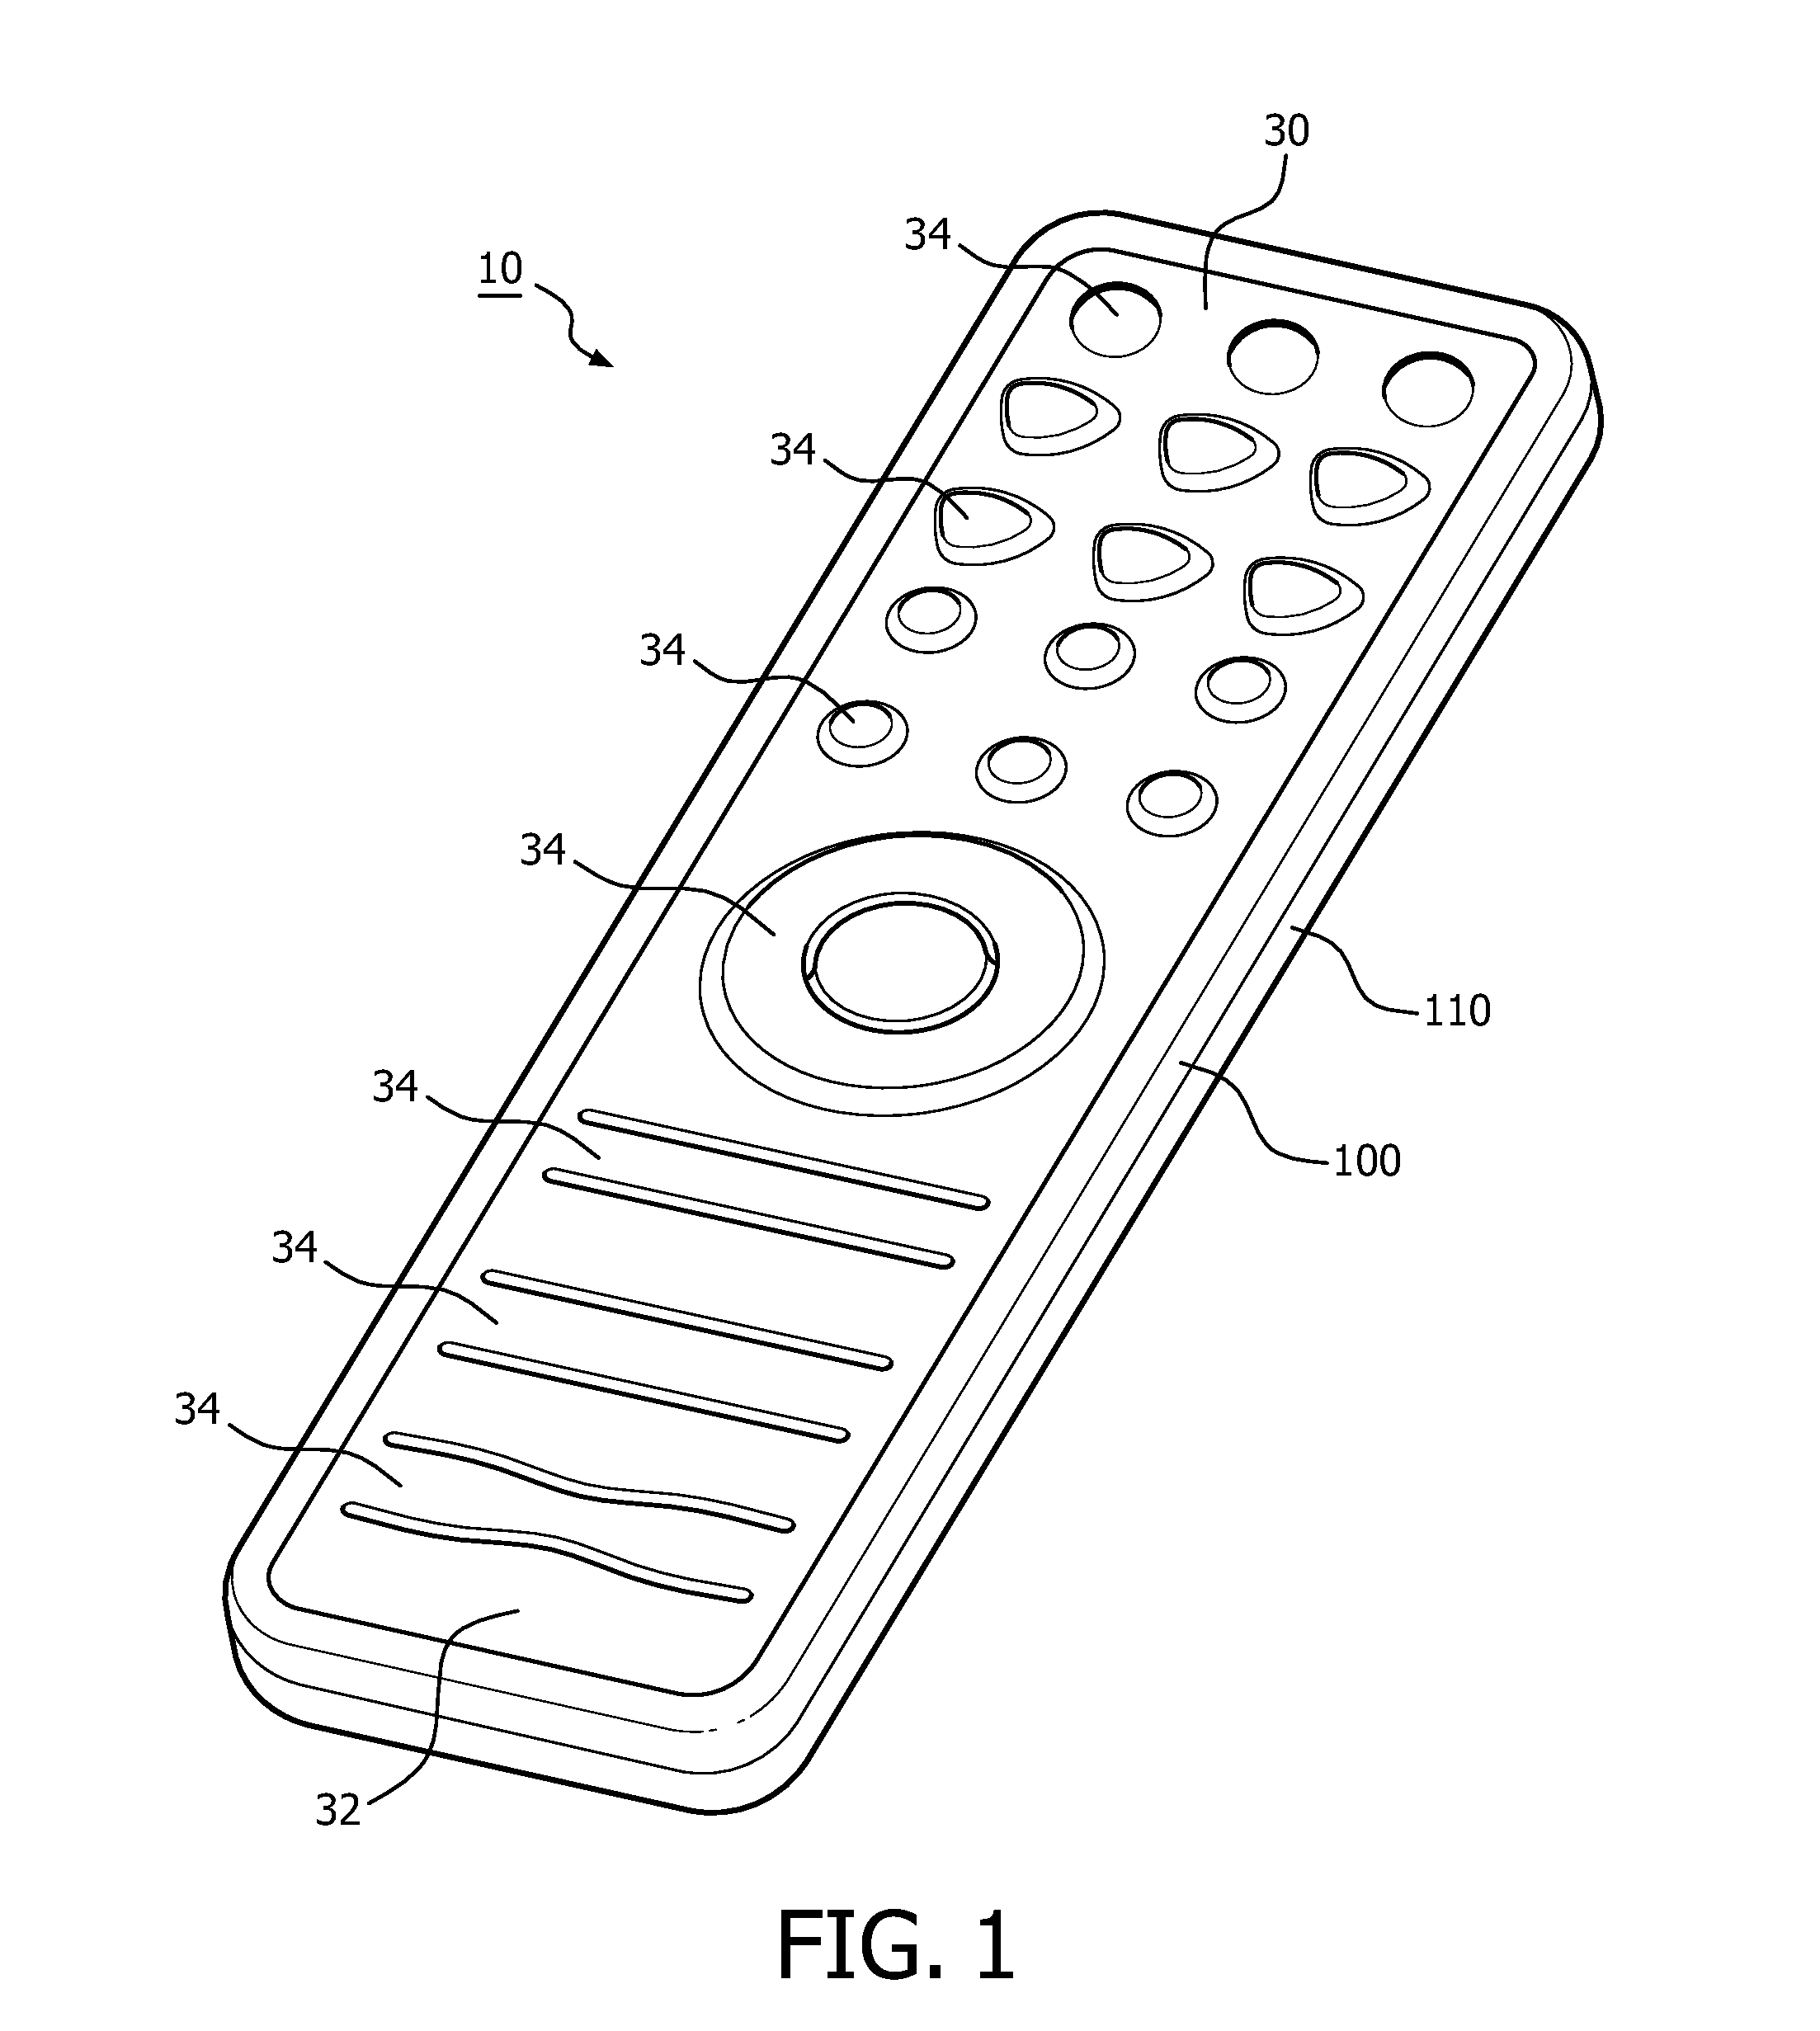 Seamless faceplate assembly for keypad device